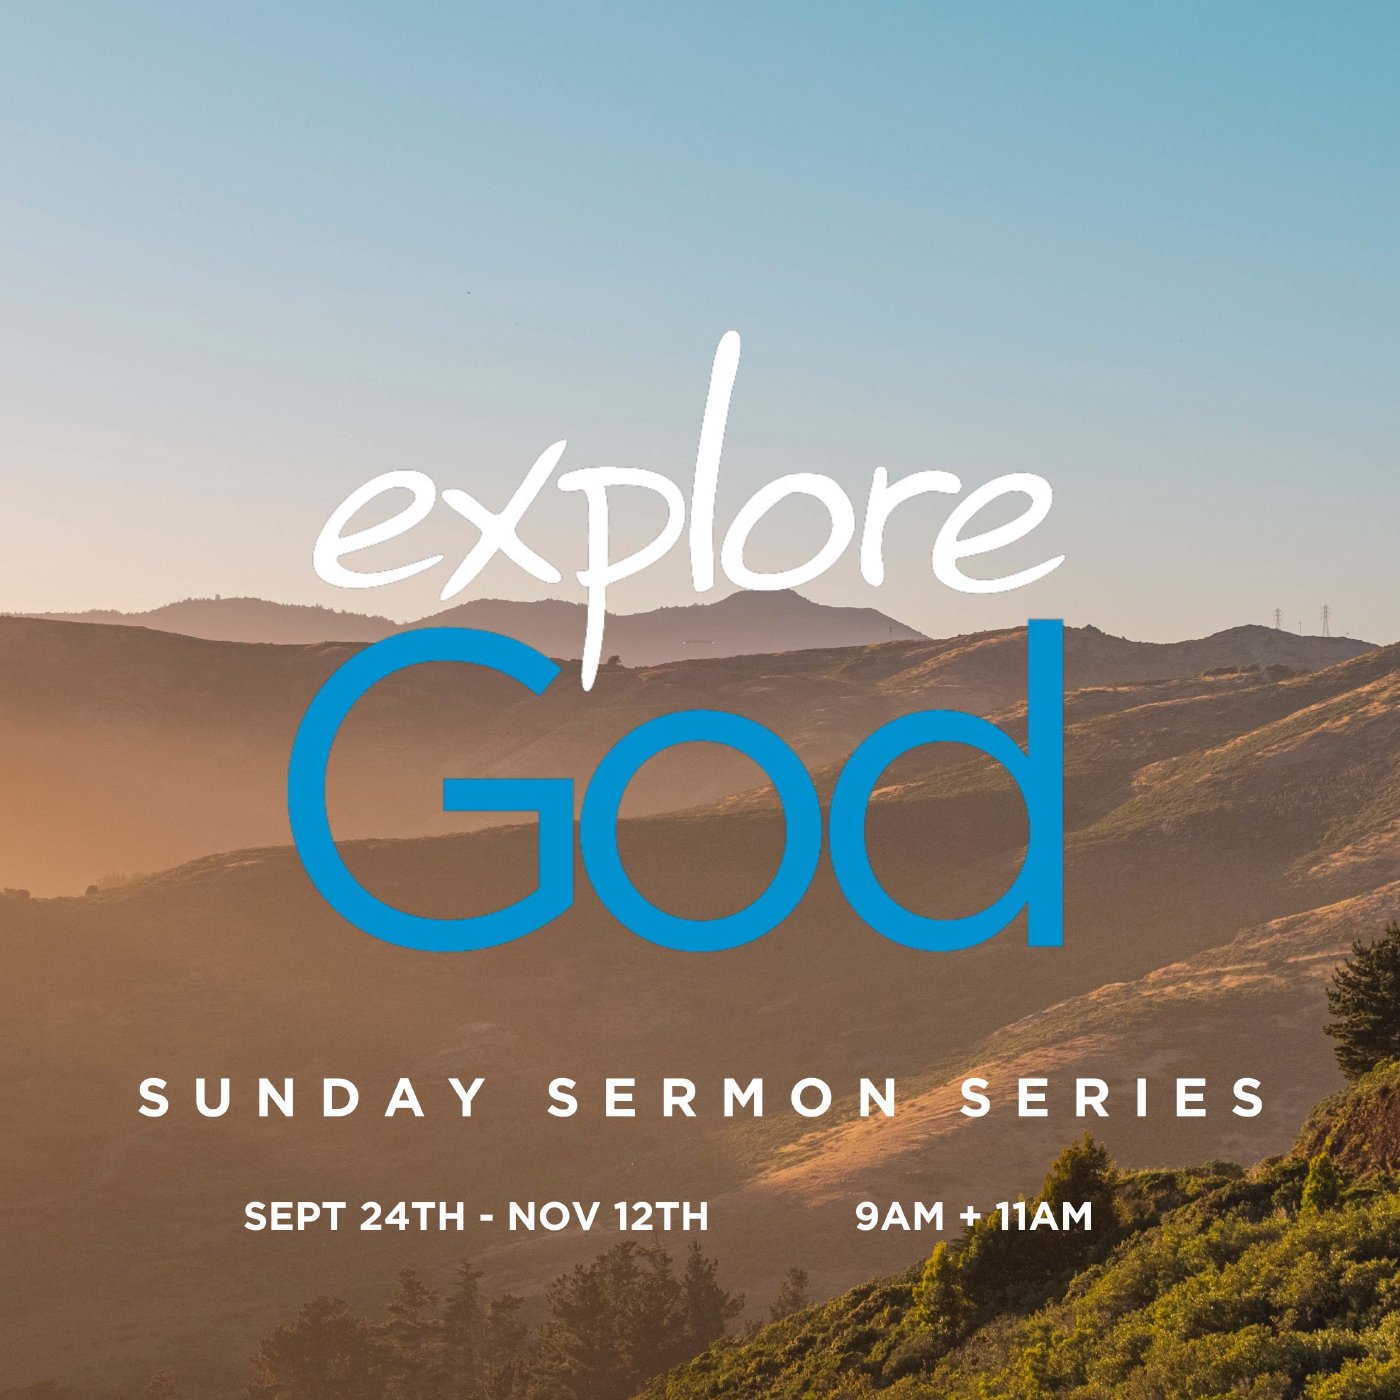 Explore God: Week 1 - What is the Purpose of Life?